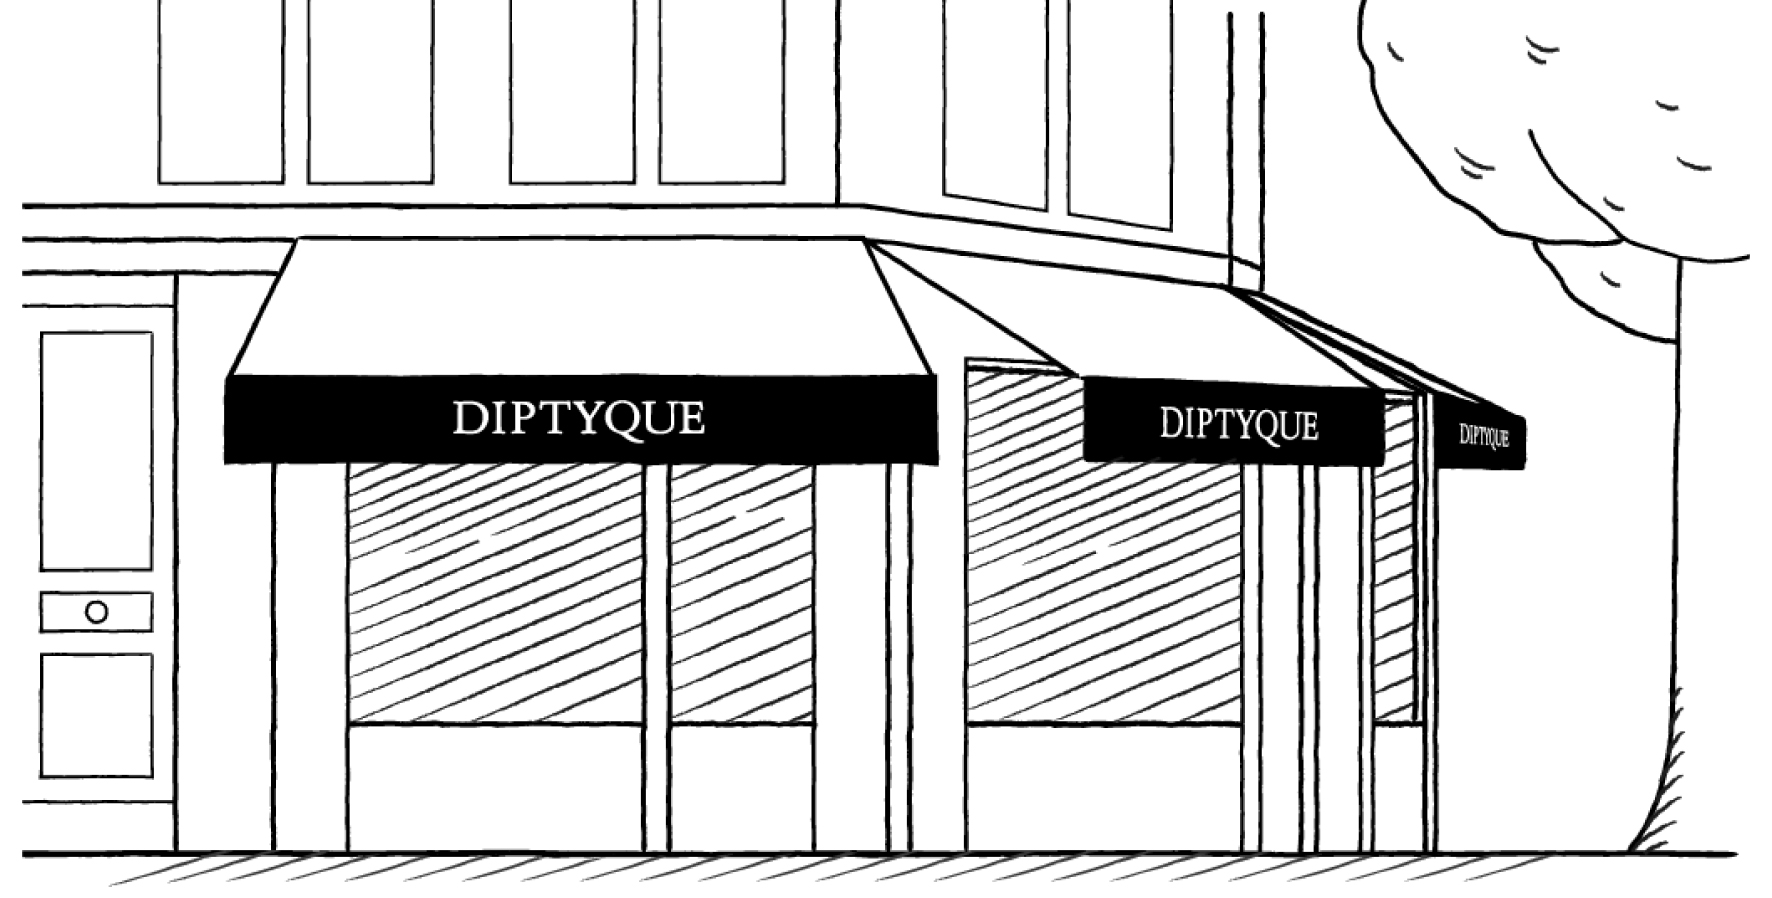 Store Image of diptyque particular location